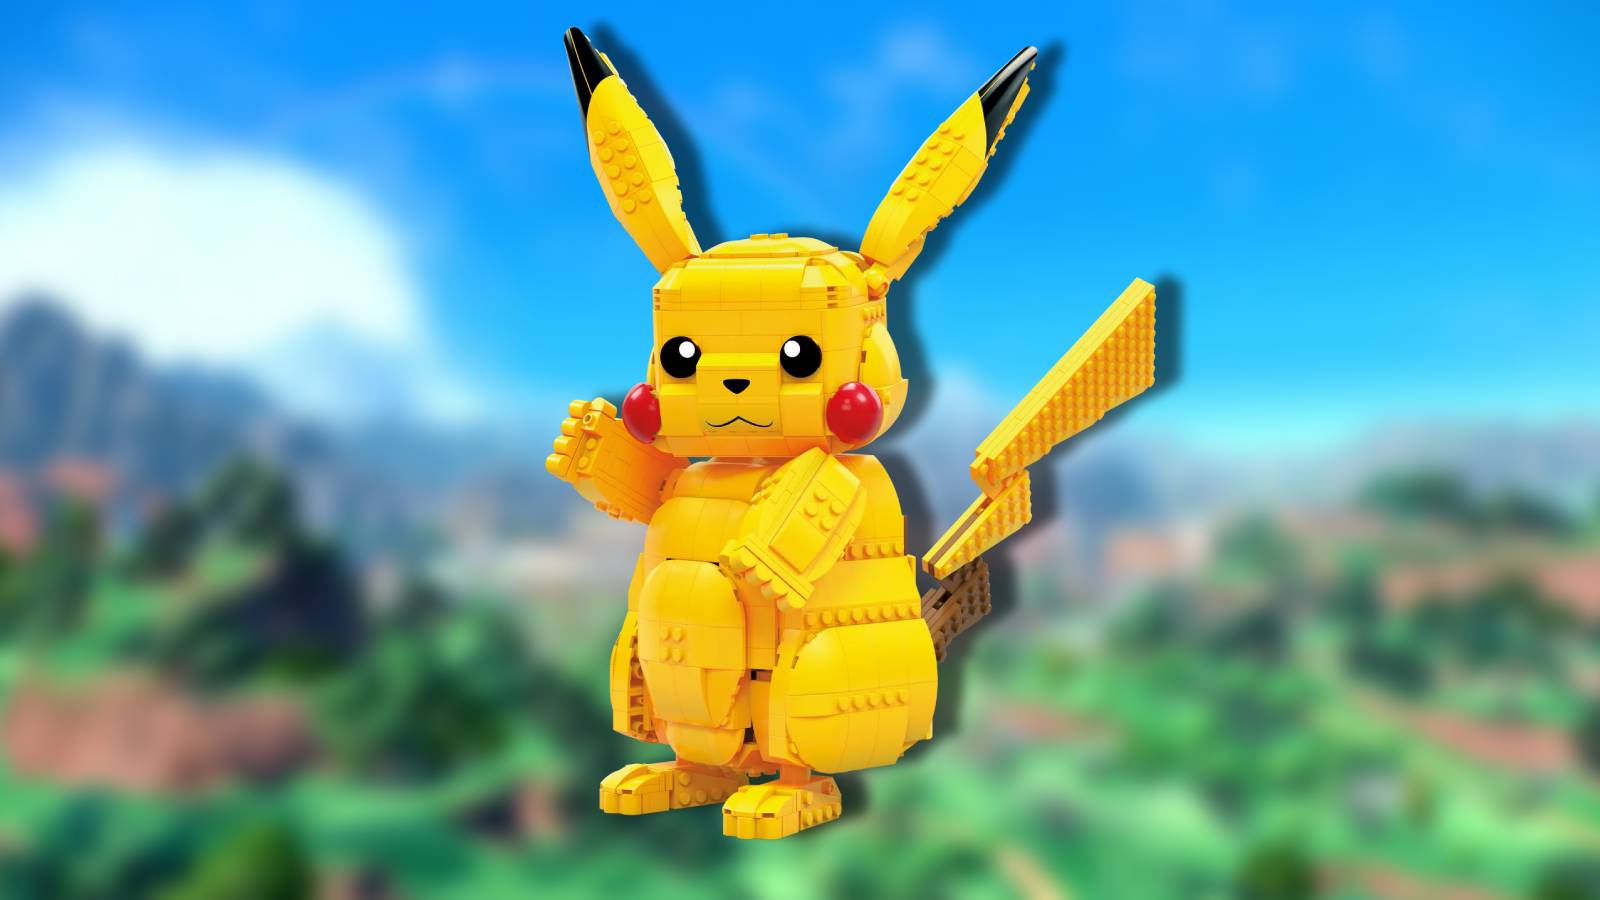 A figure of Pikachu is visible, made out of building blocks